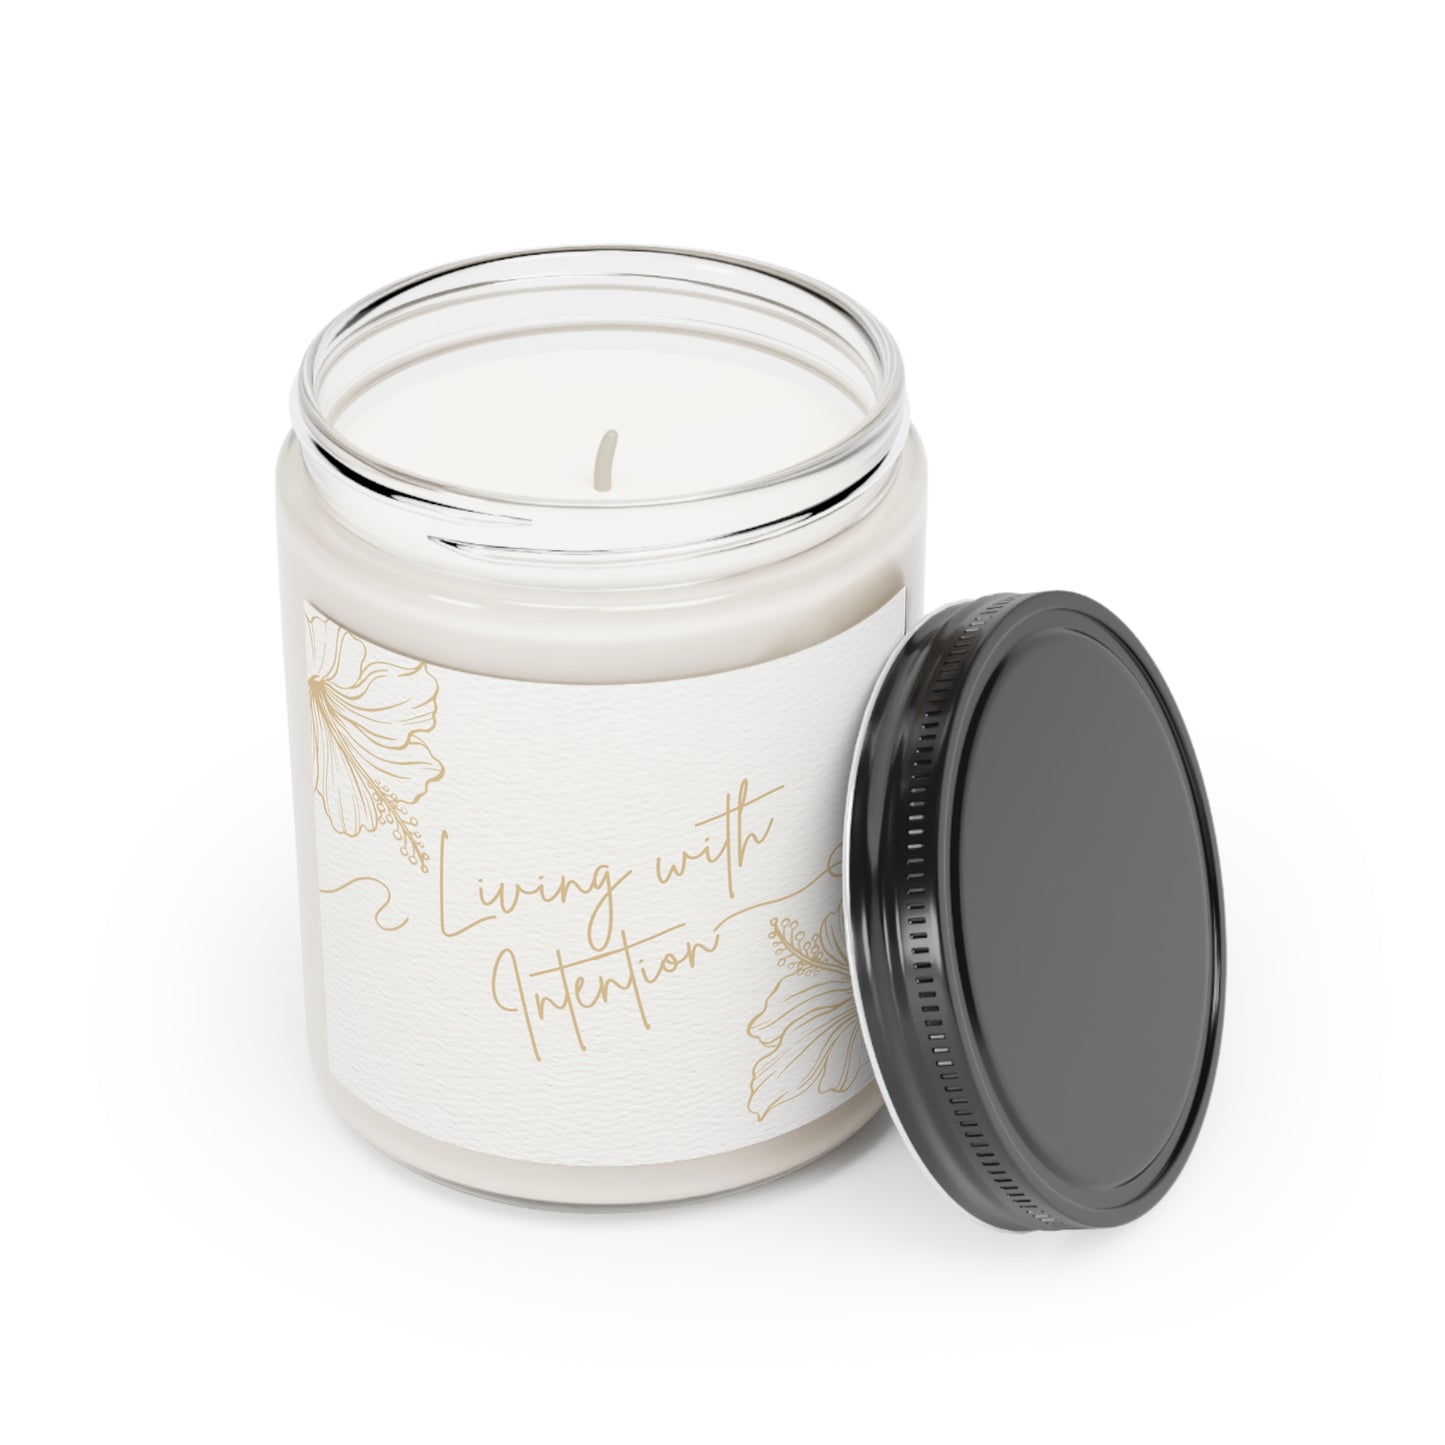 Scented Candle, 9oz - Living with INTENTION - Made from vegan soy coconut wax, hand-poured | 2 ambrosial fragrances available, Cinnamon Stick and Vanilla.